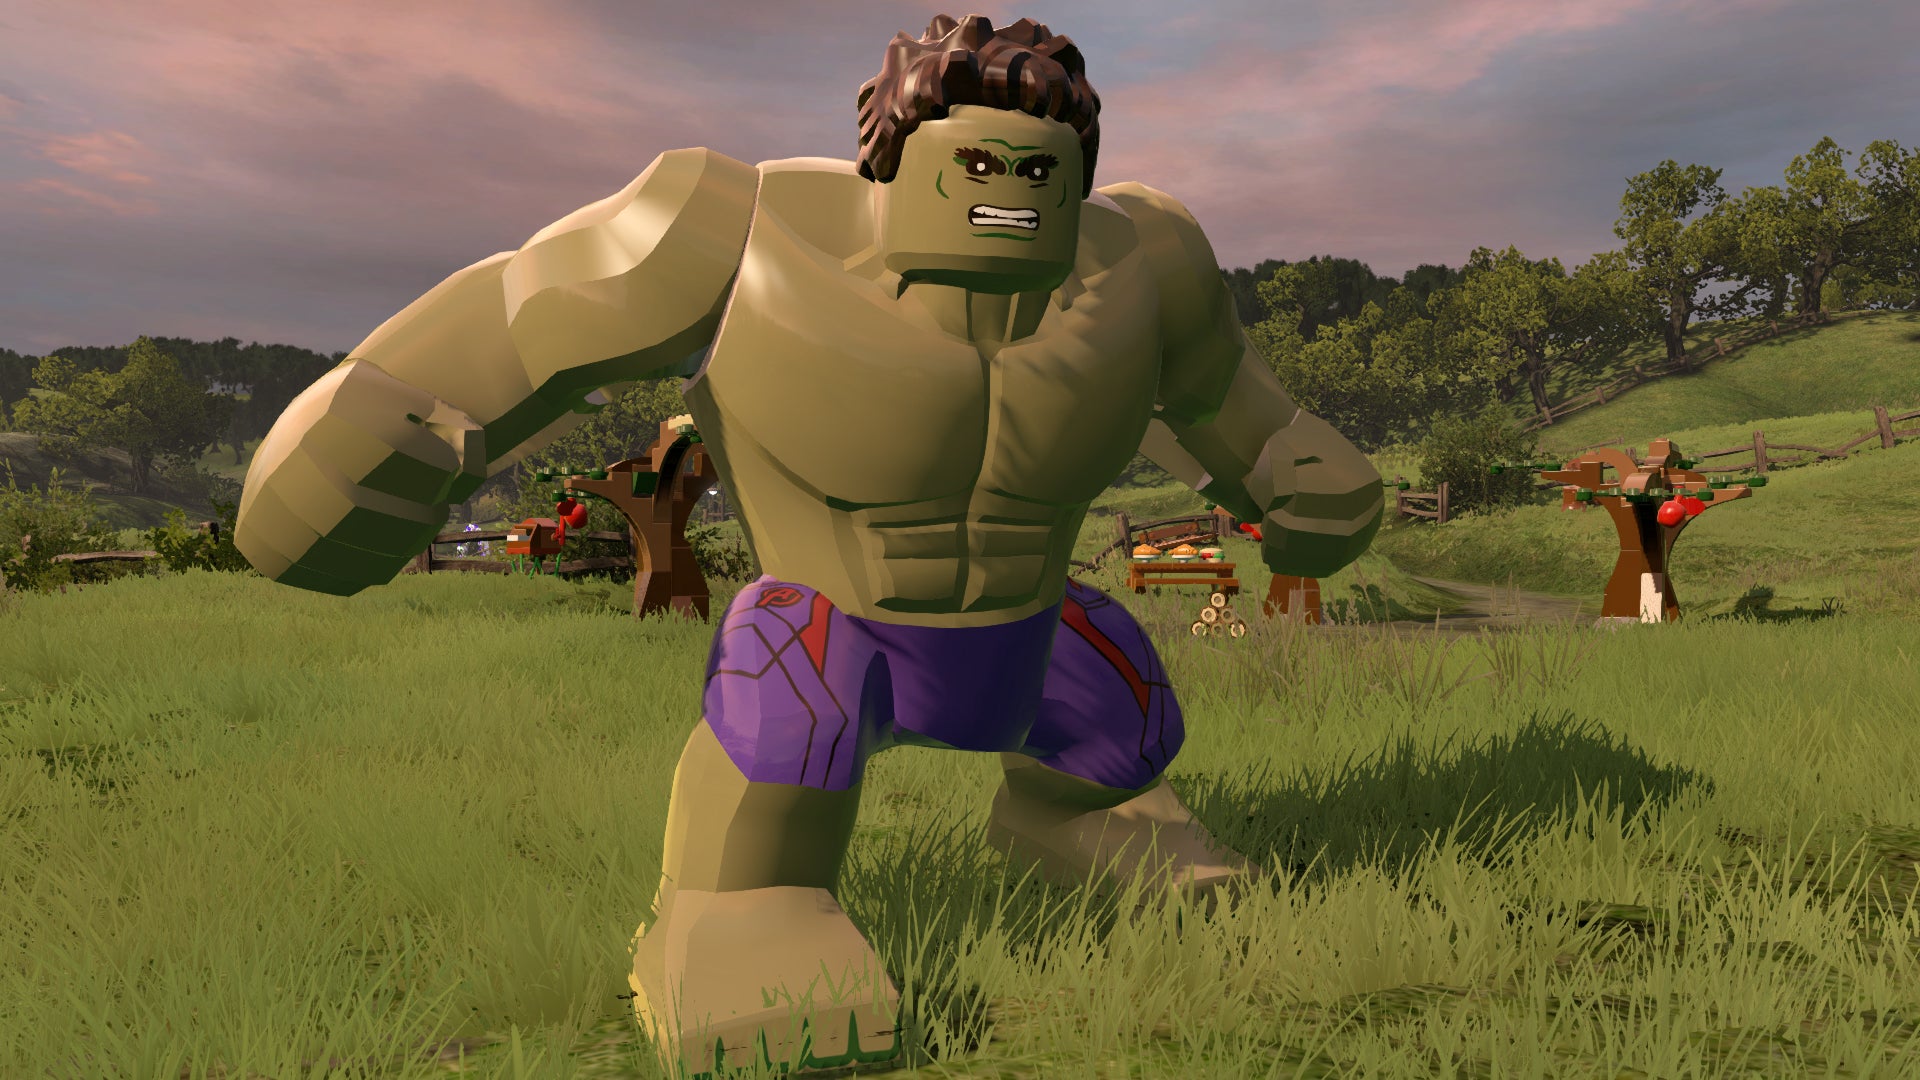 Hulk looking angry in Lego Marvels Avengers